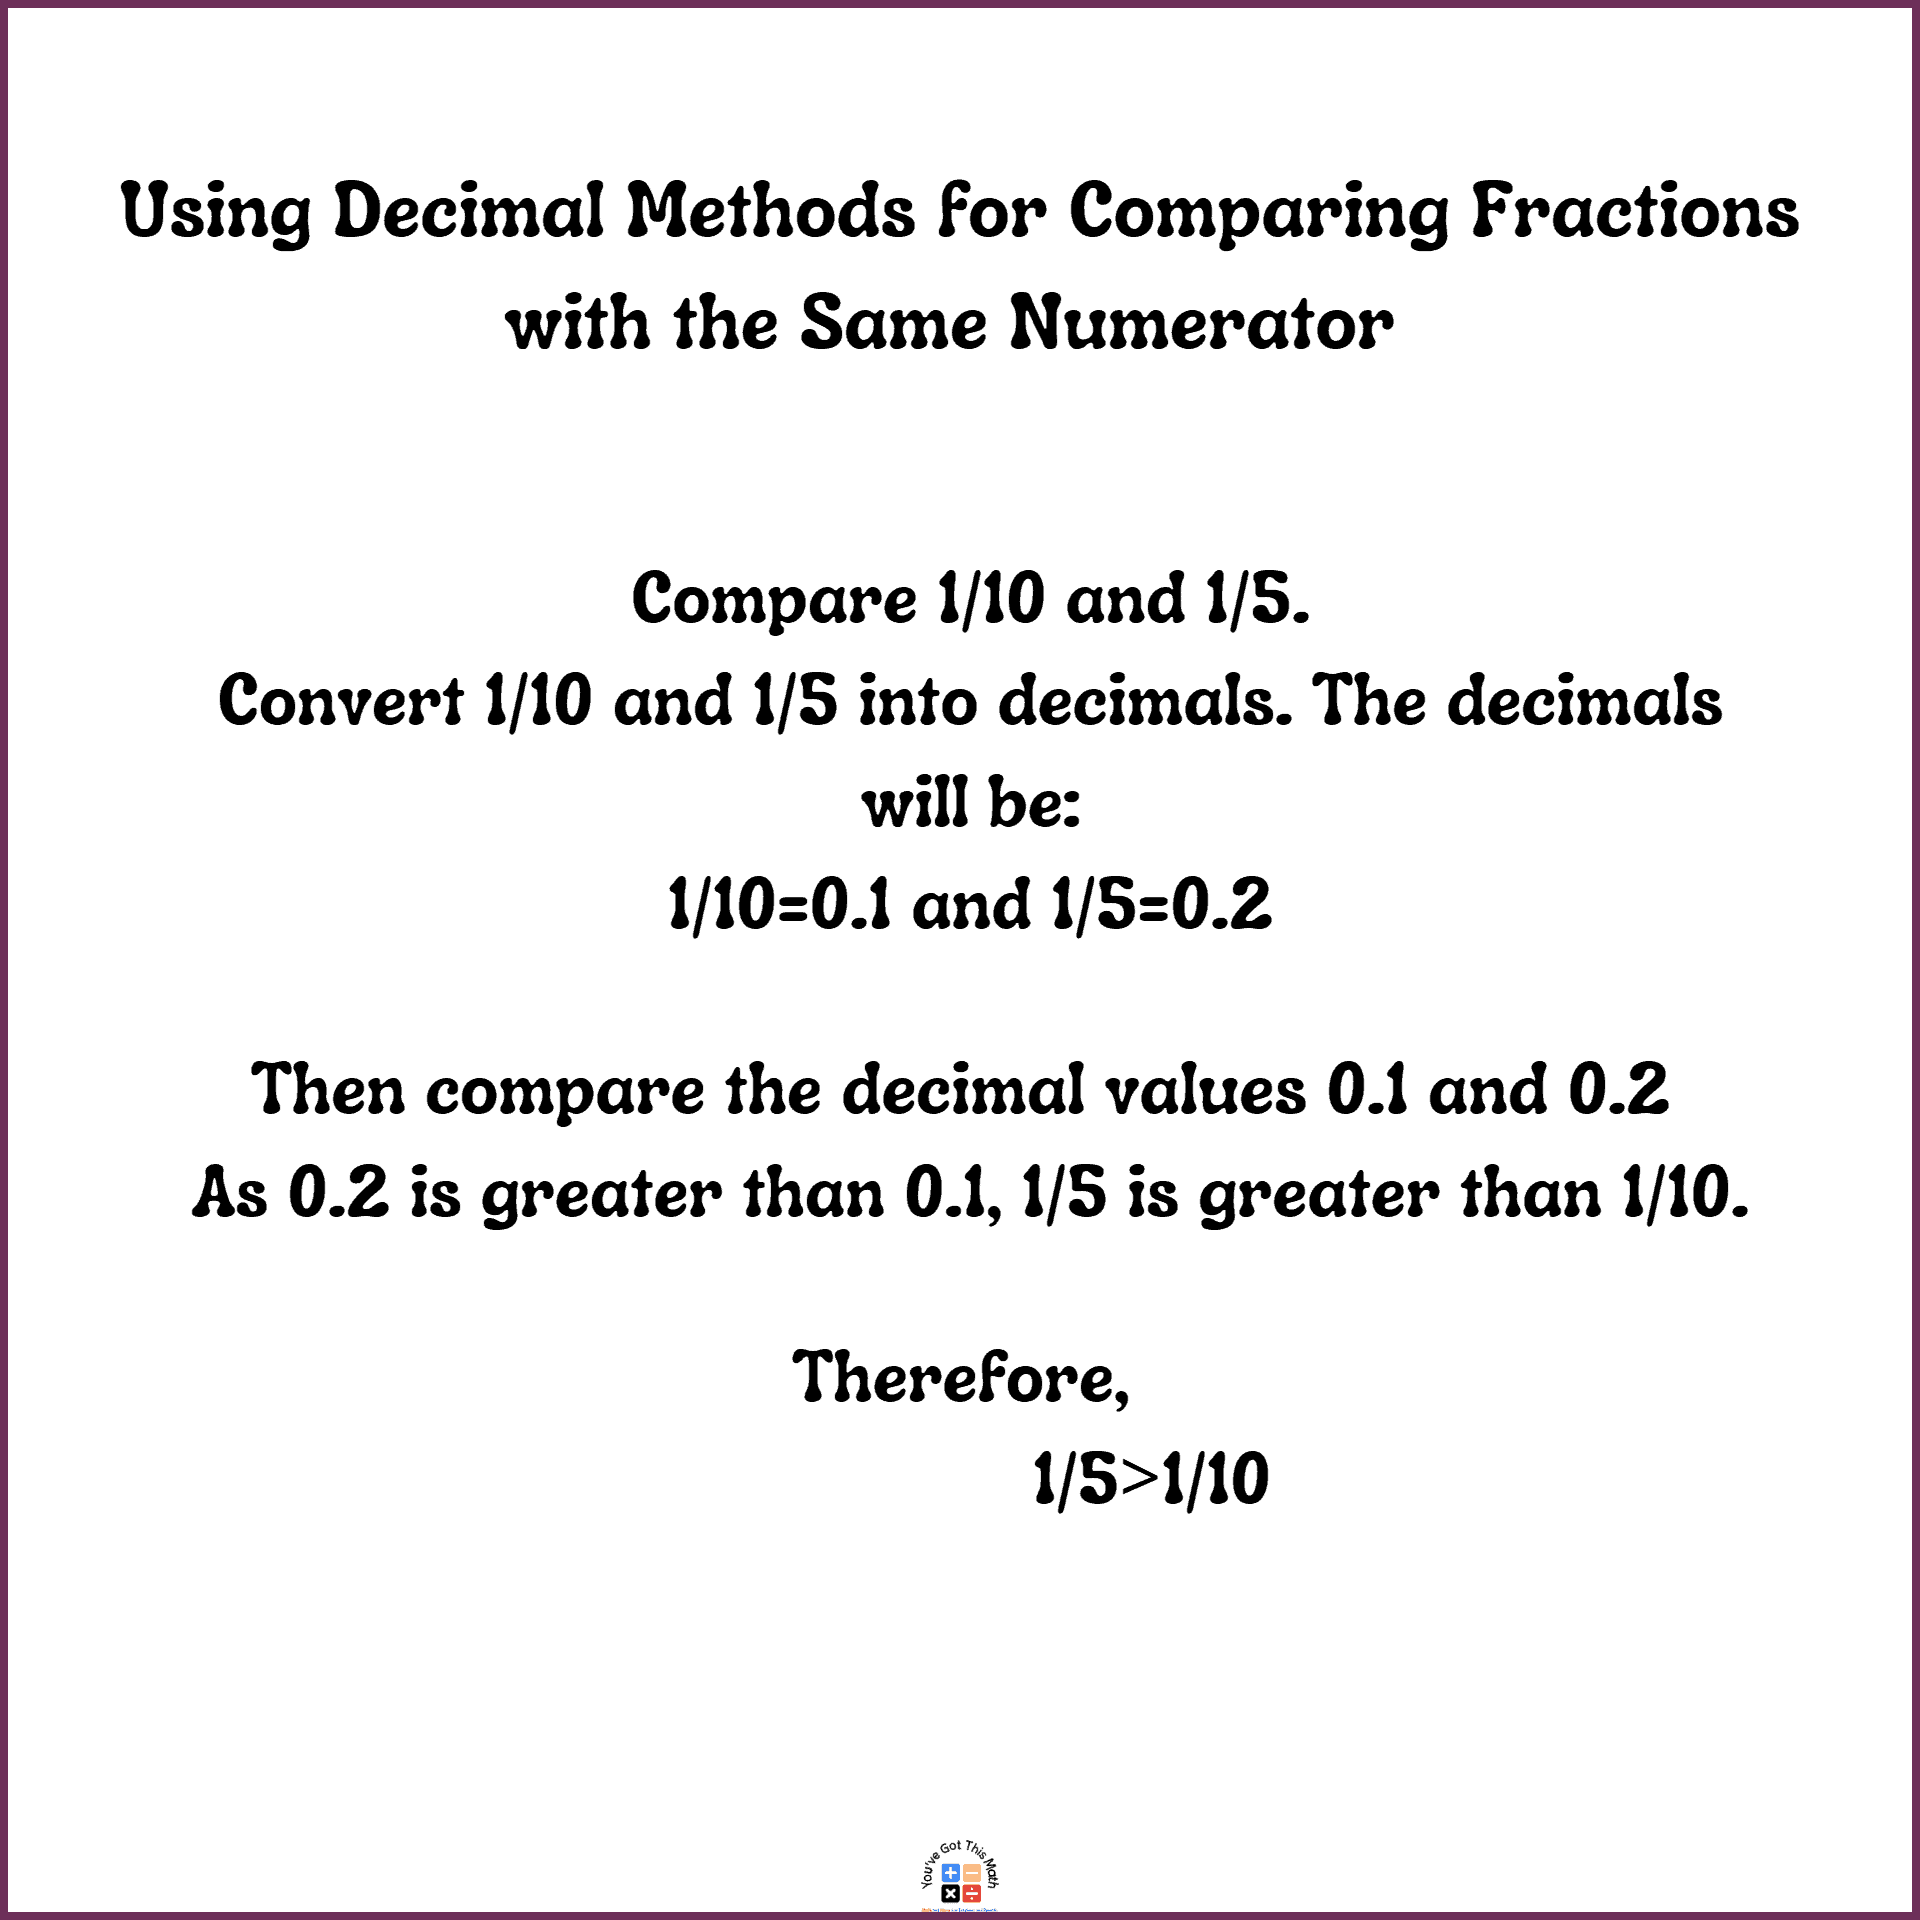 Using Decimal Methods for comparing fractions with the same numerator 